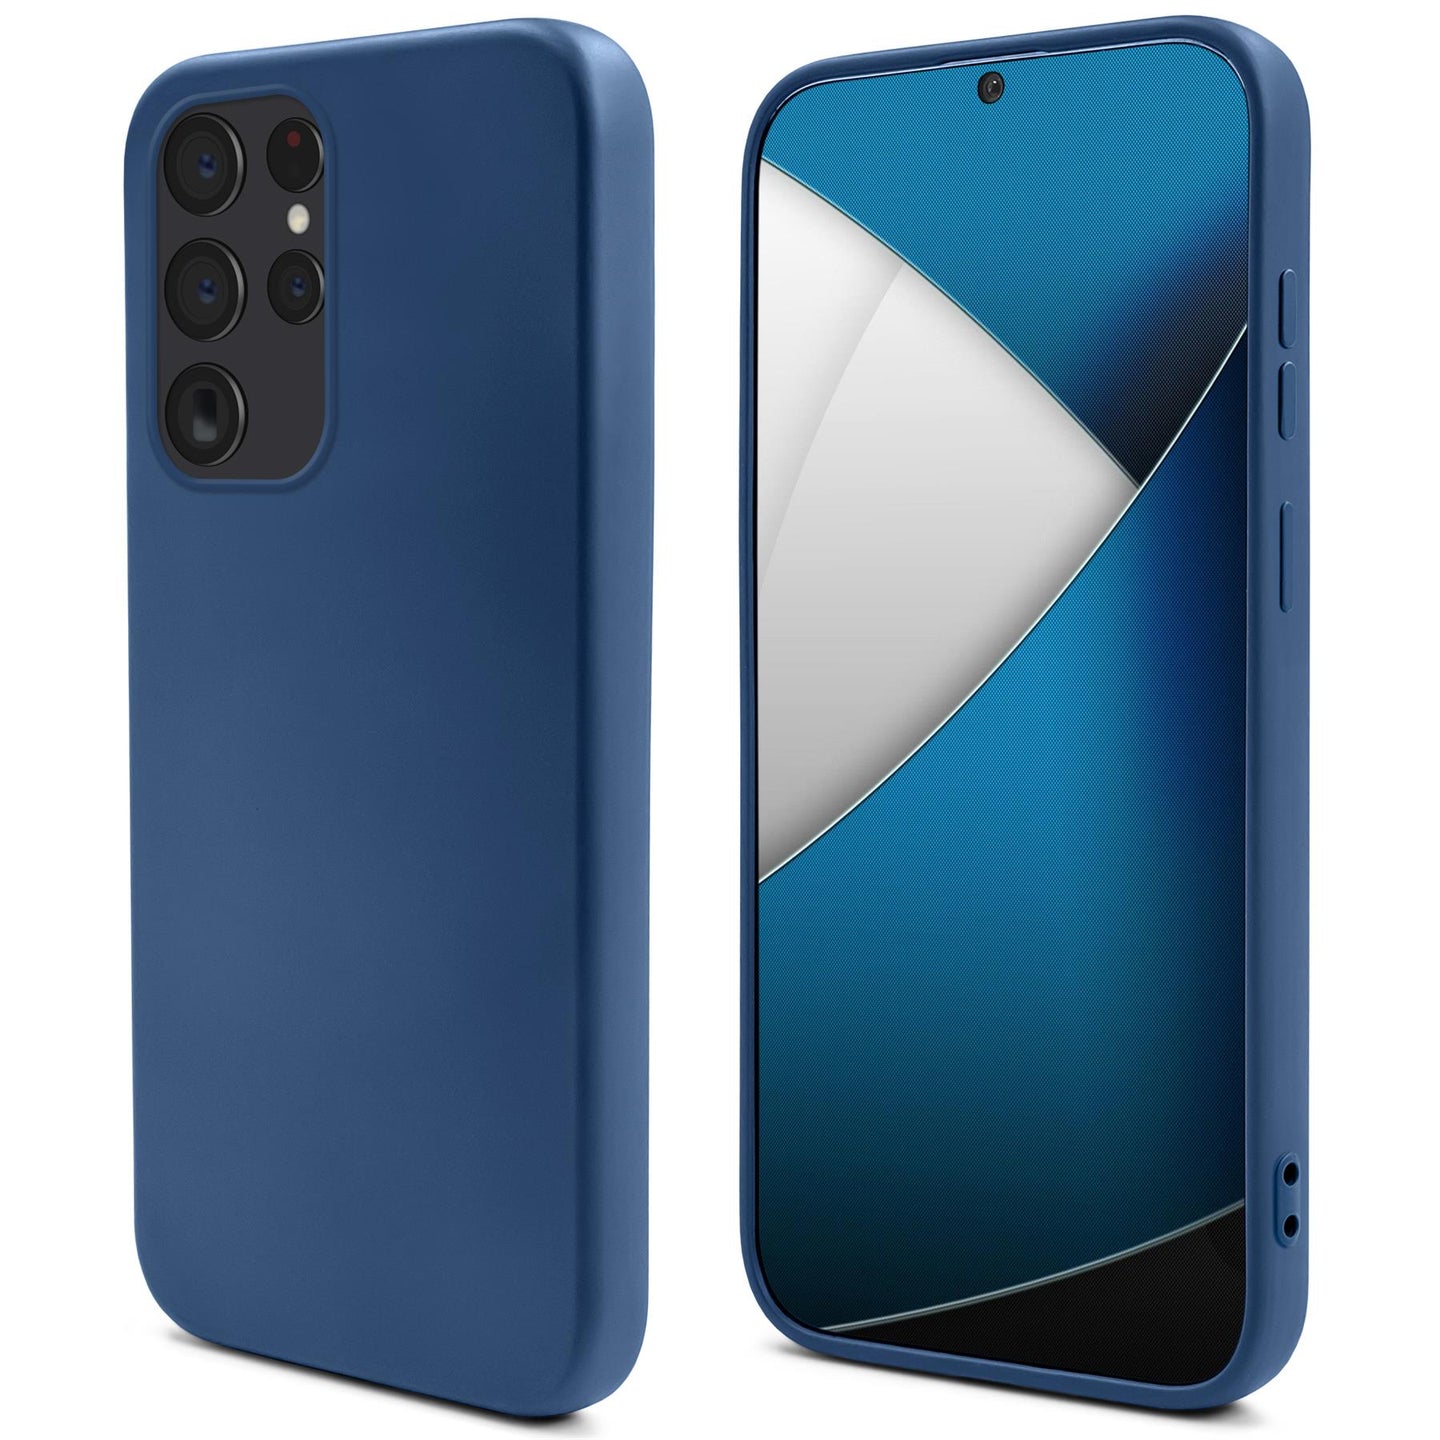 Moozy Lifestyle. Silicone Case for Samsung S23 Ultra, Midnight Blue - Liquid Silicone Lightweight Cover with Matte Finish and Soft Microfiber Lining, Premium Silicone Case